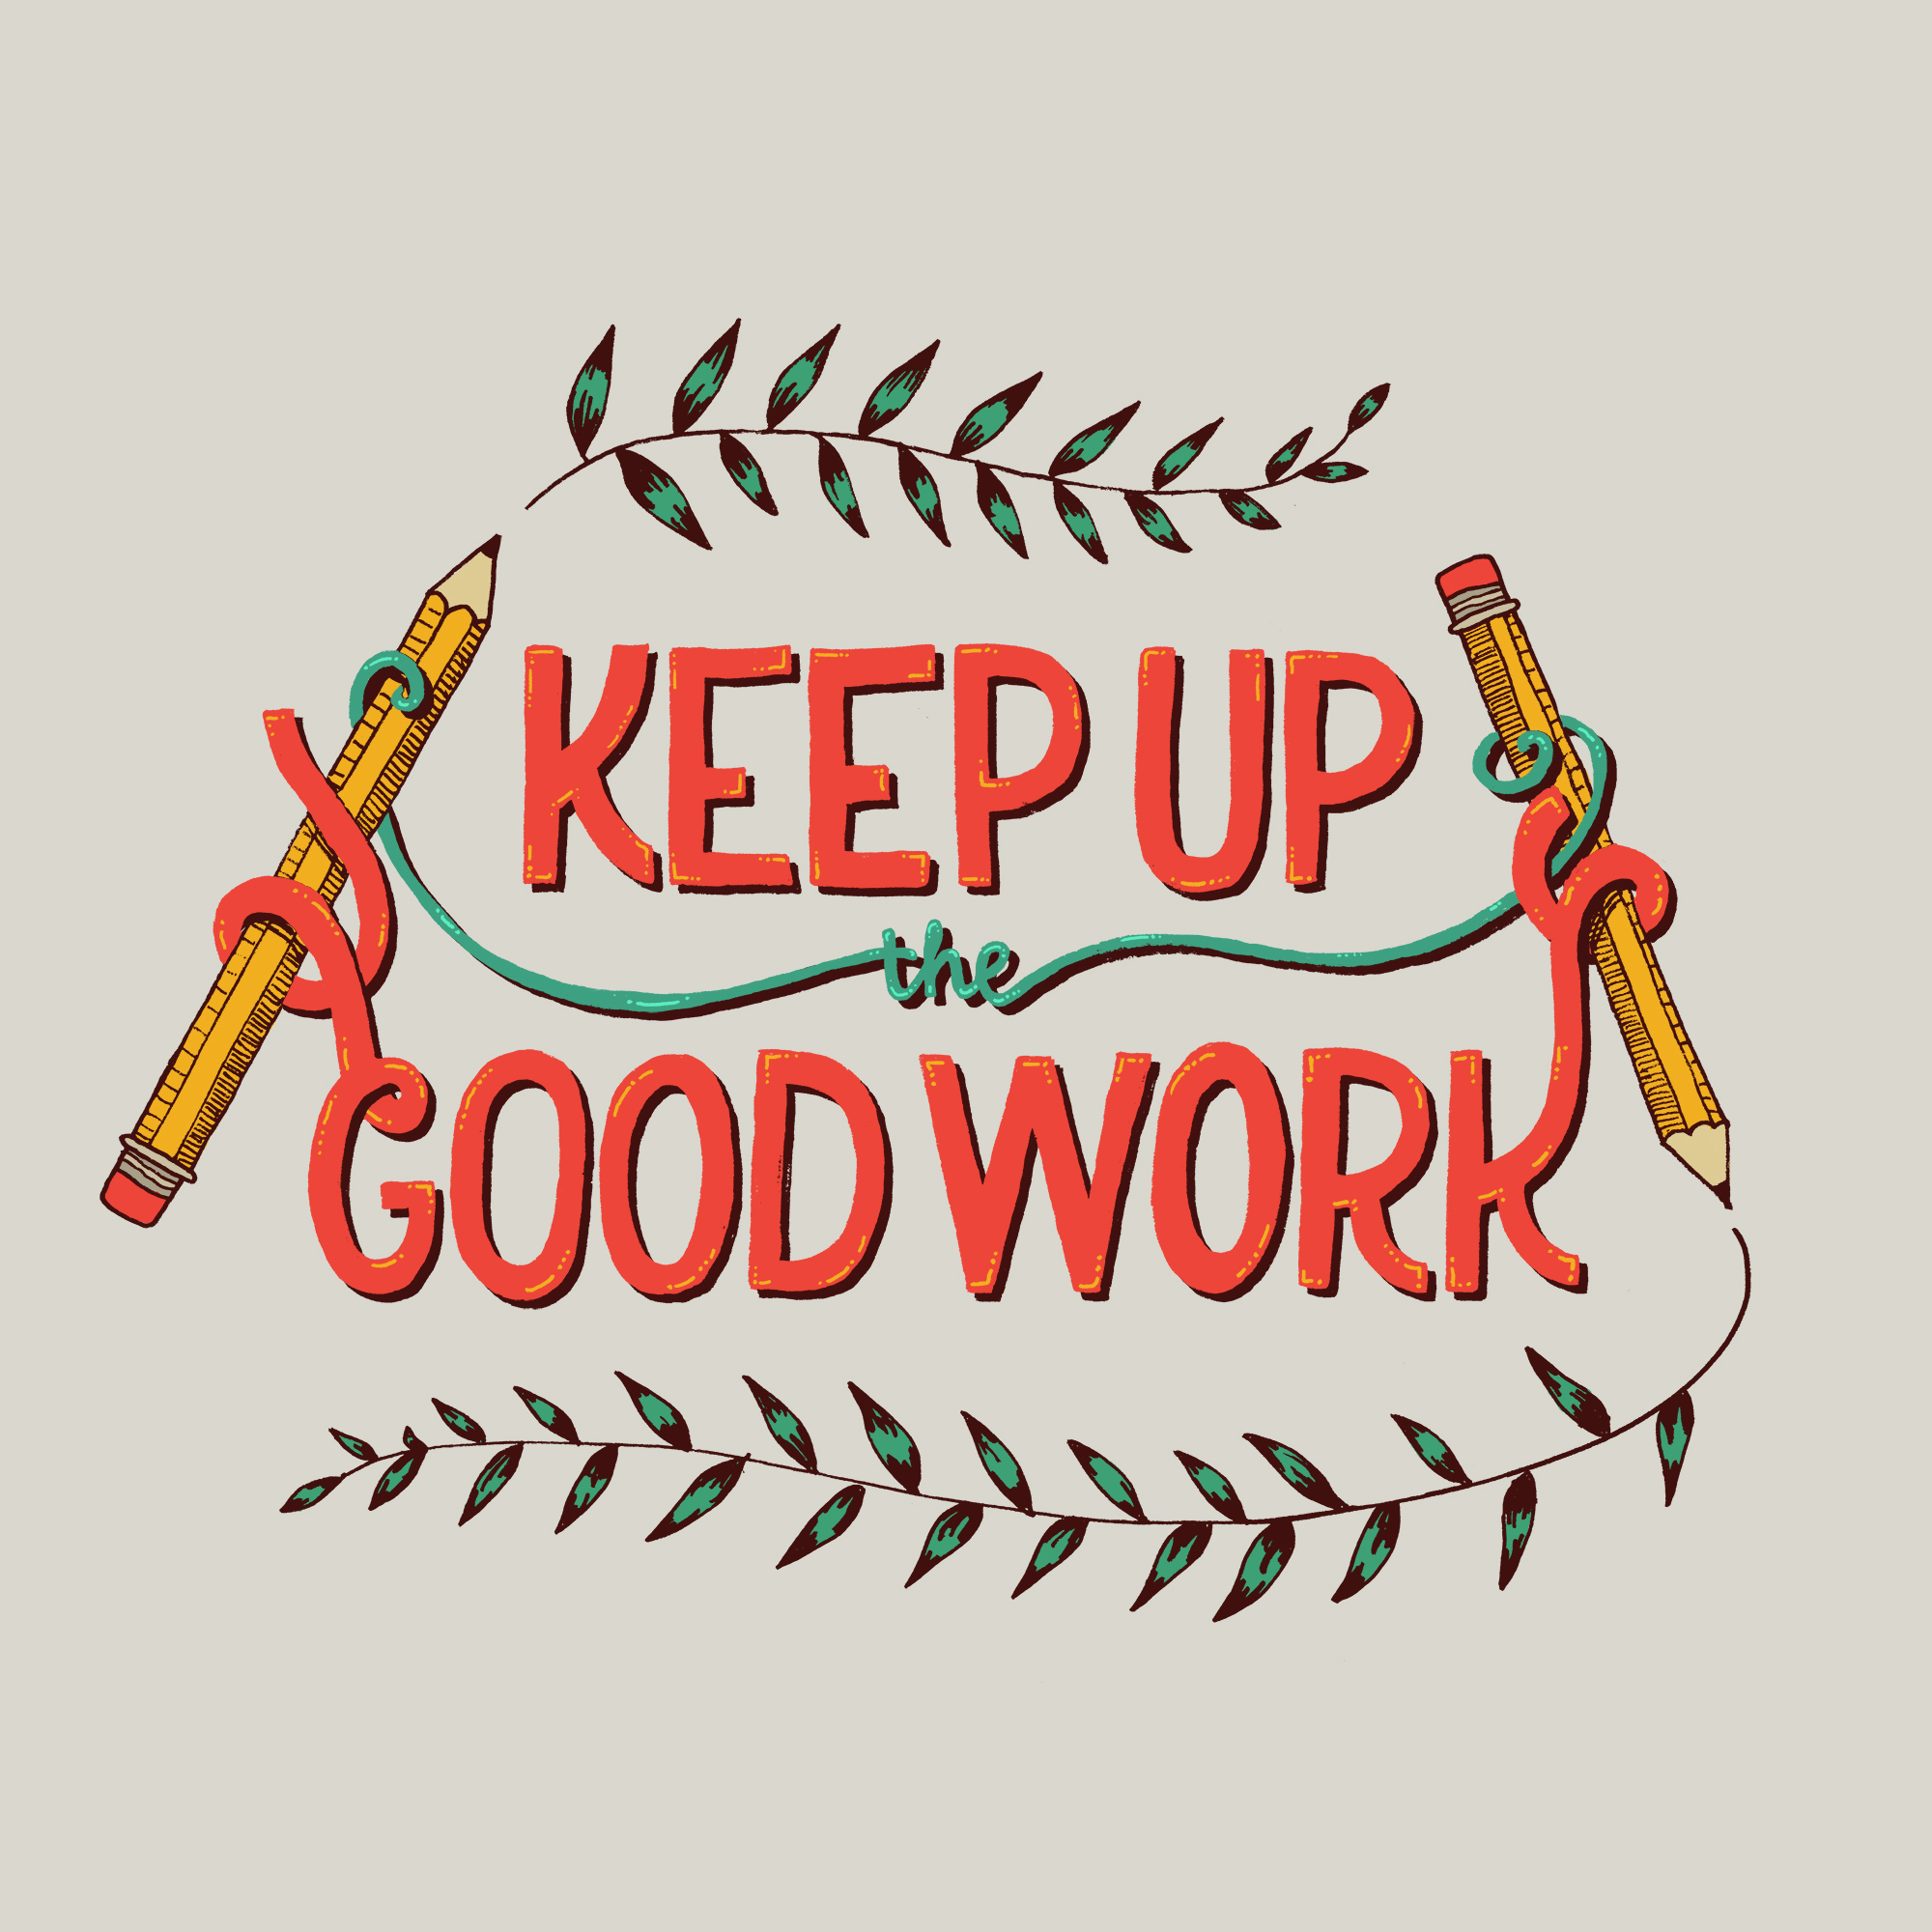 Keep up the work. Keep up the good work picture.